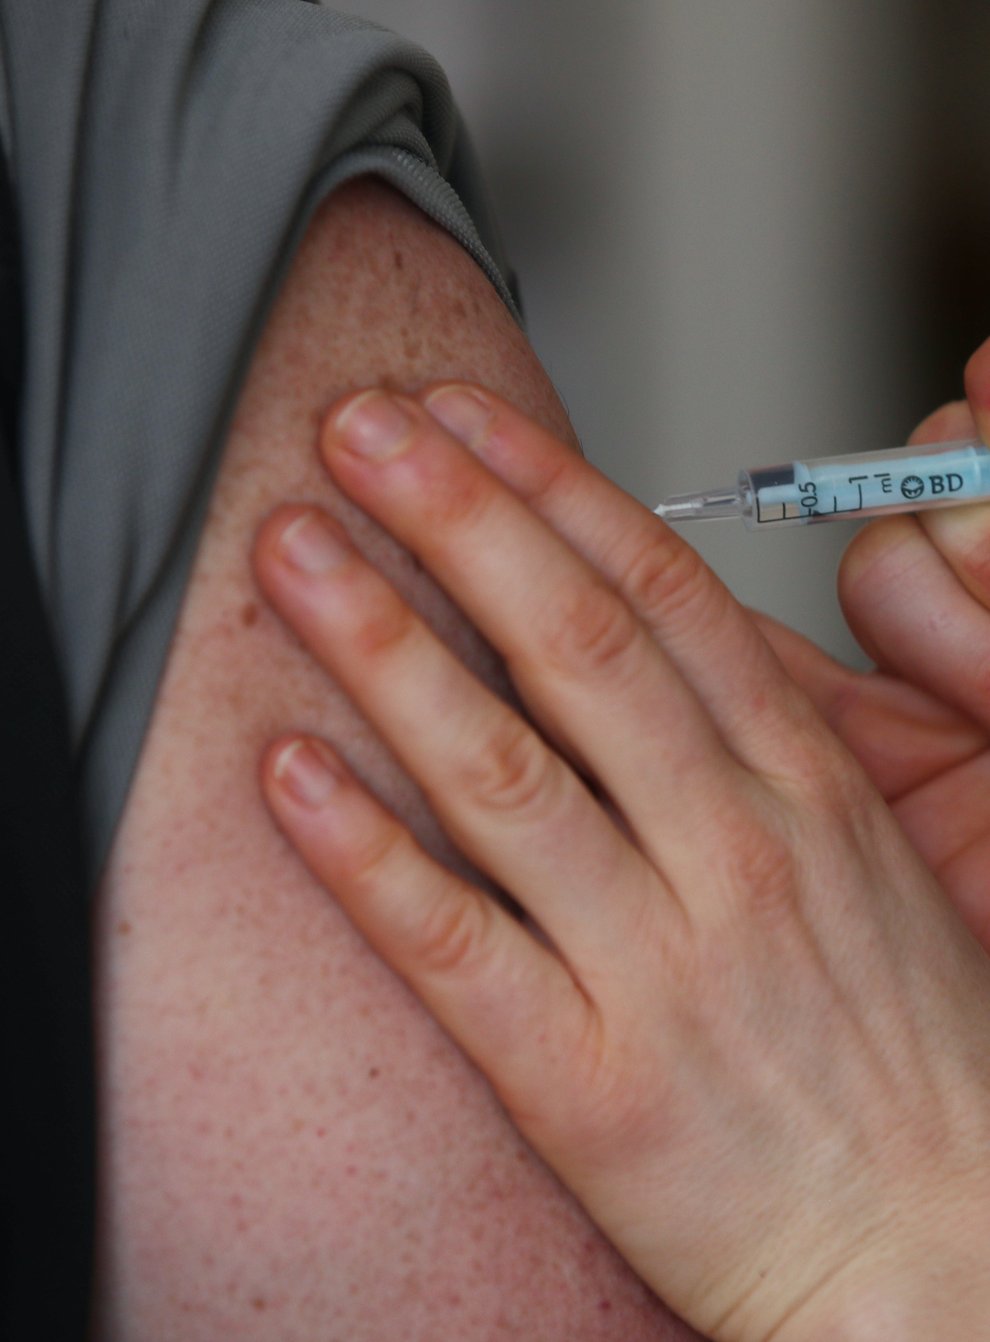 Covid-19 vaccine protection waning in those first vaccinated, study suggests (Nick Potts/PA)